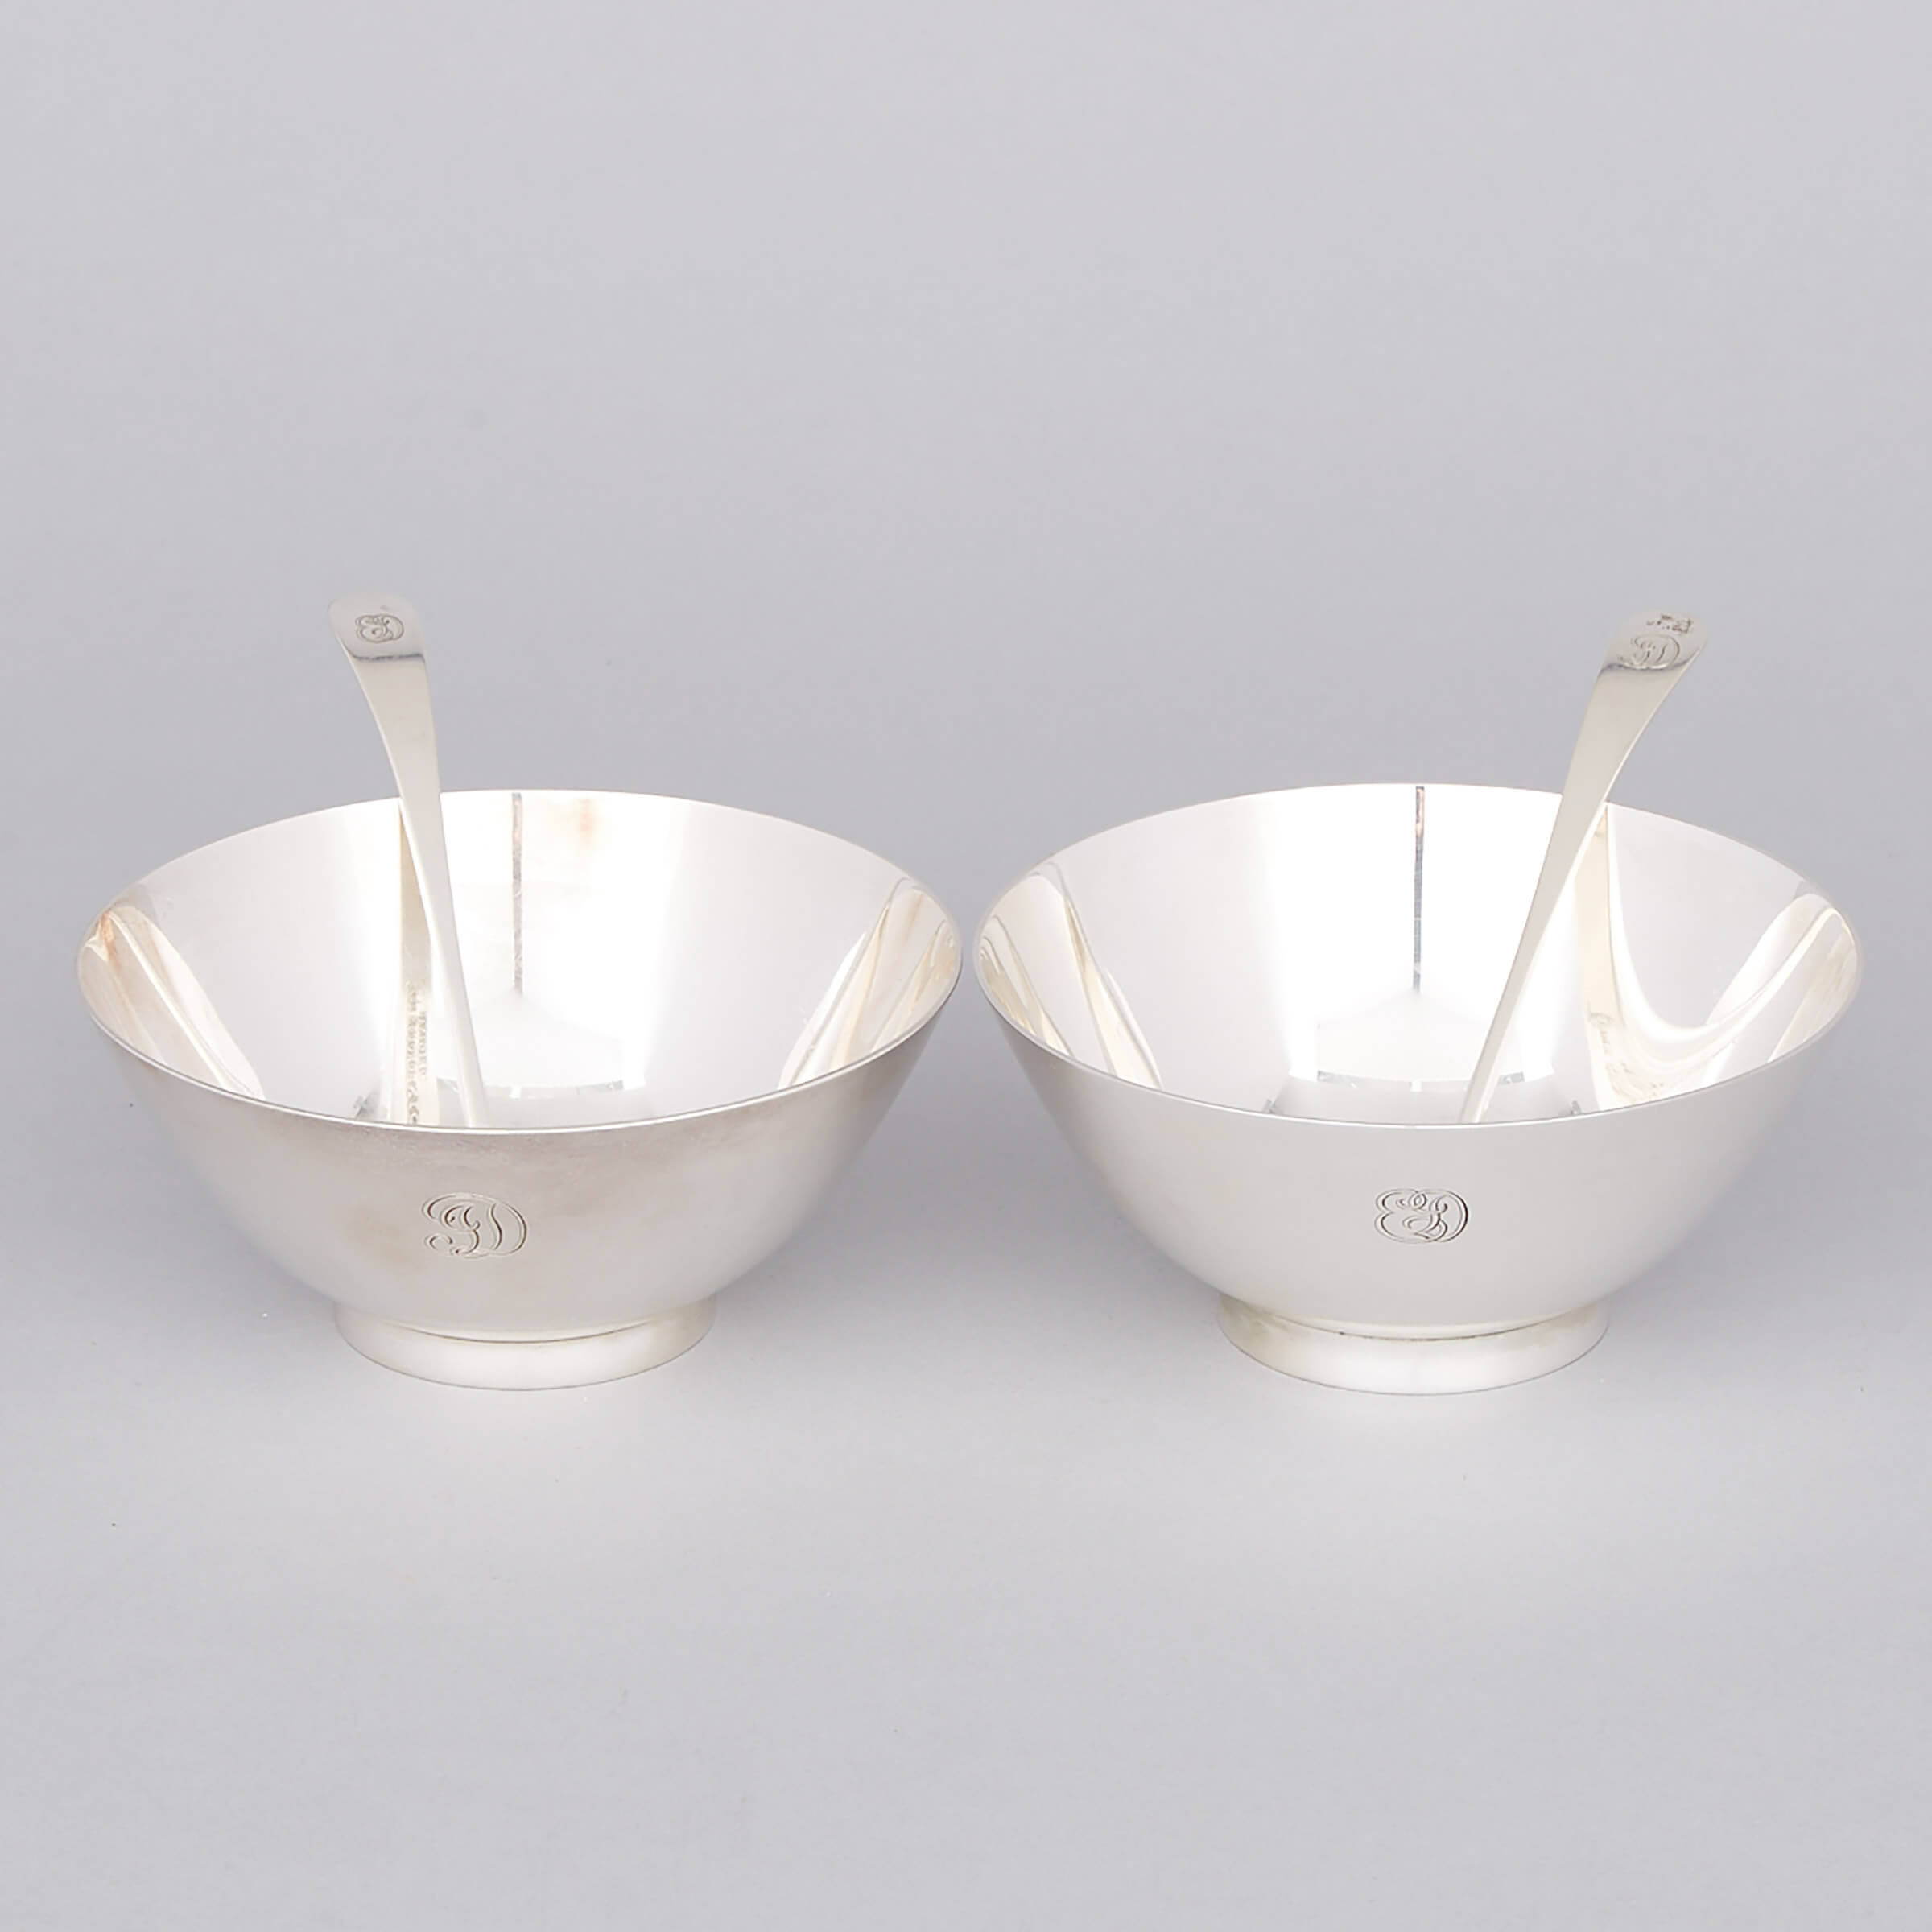 Pair of American Silver Bowls and Ladles, Tiffany & Co., New York, N.Y., 20th century